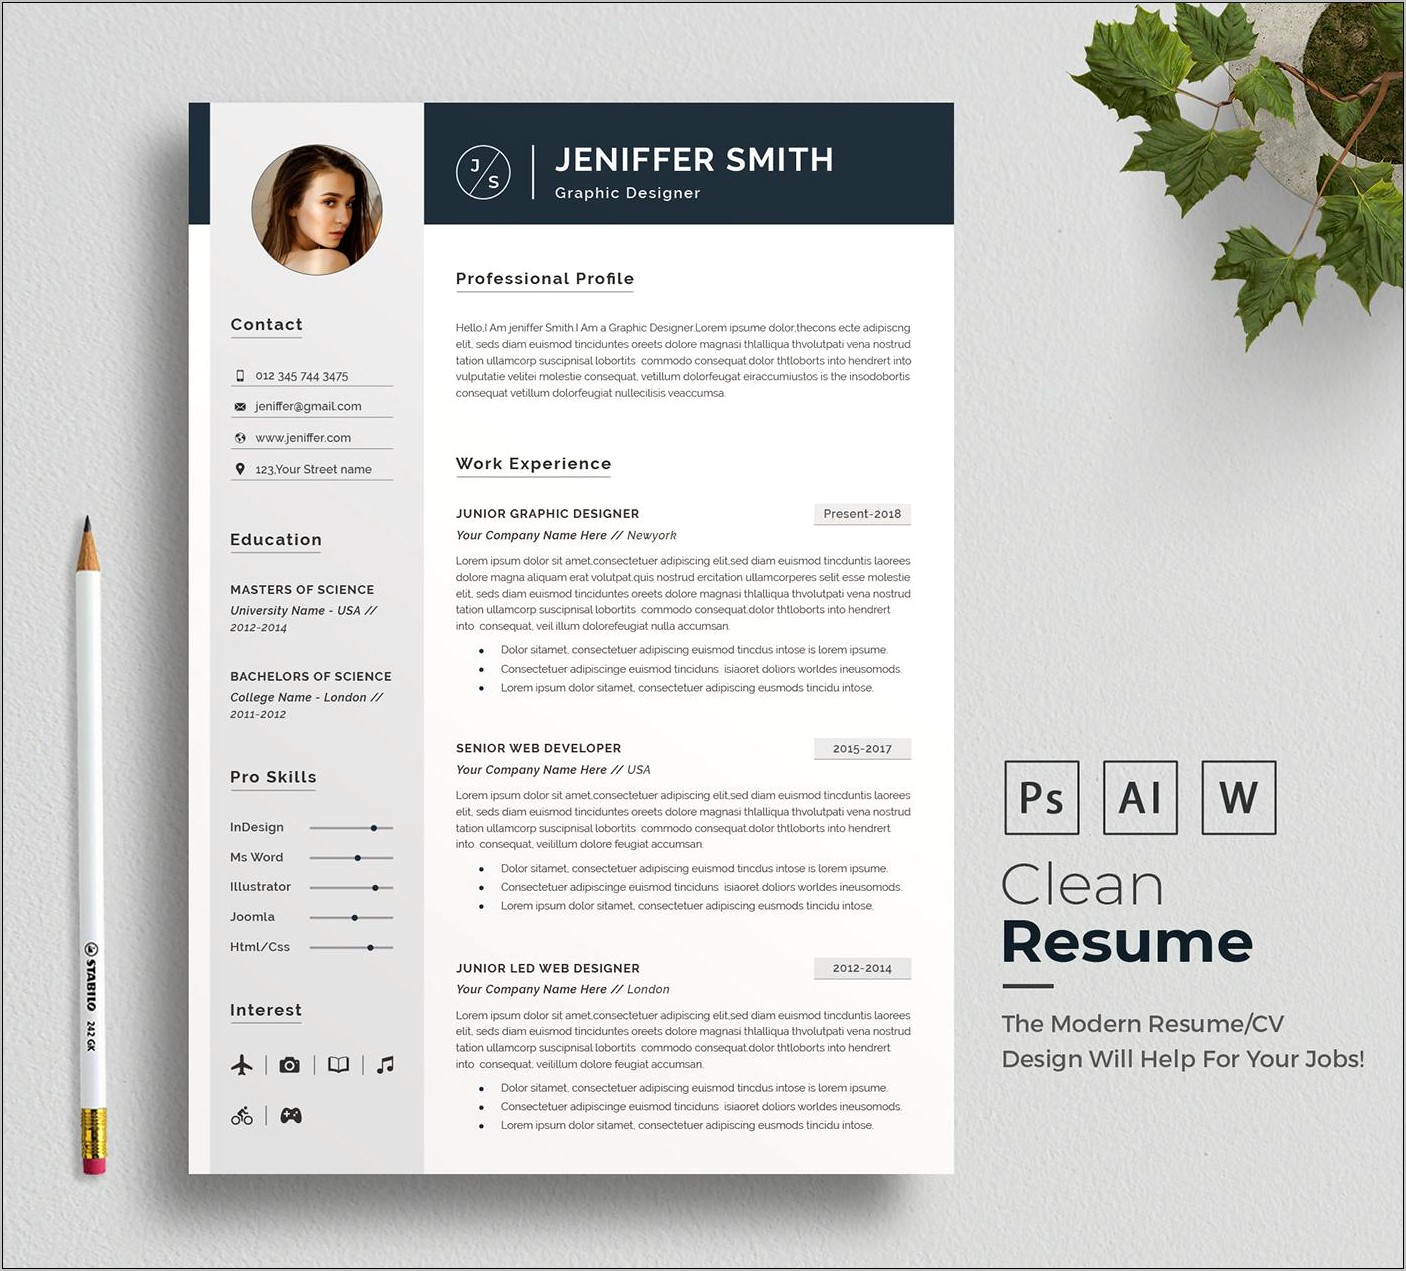 are-there-resume-templates-in-word-resume-example-gallery